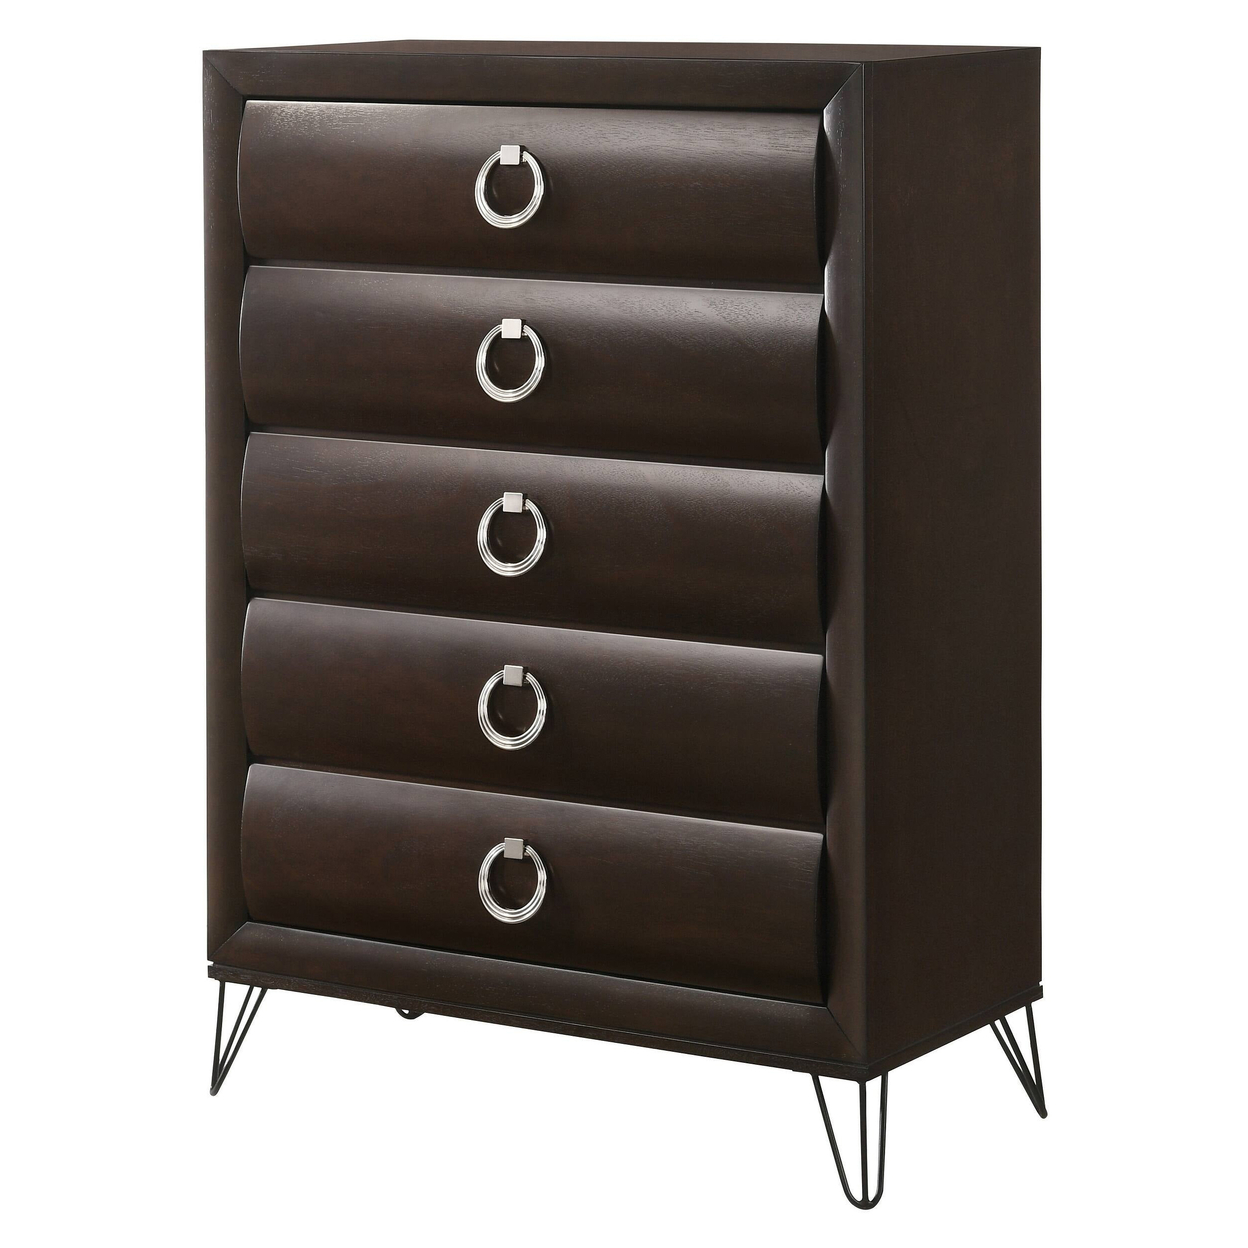 5 Drawer Wooden Chest With Metal Ring Handles And Harpin Legs, Brown- Saltoro Sherpi